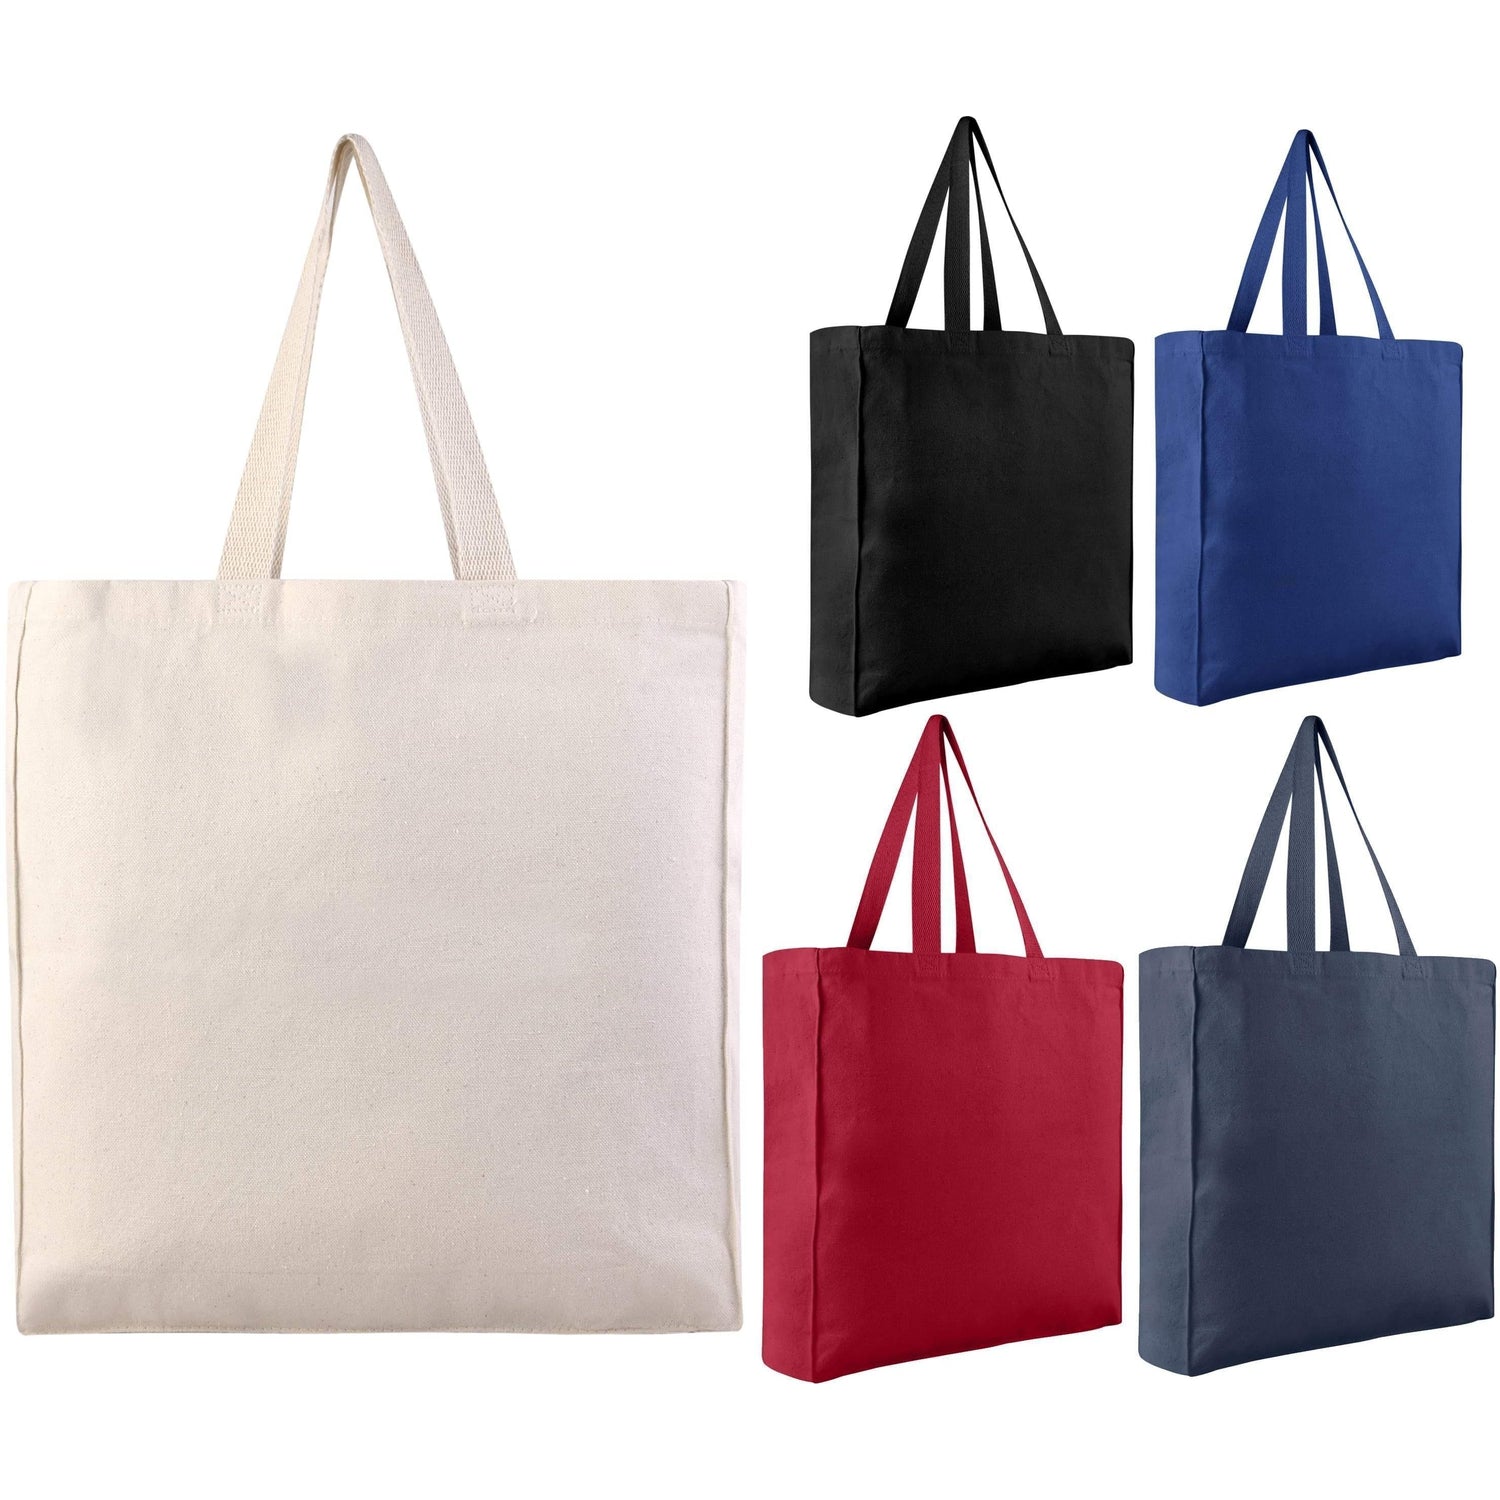 Sturdy Canvas Shopping Tote Bags Wholesale with Gussets – BagzDepot™